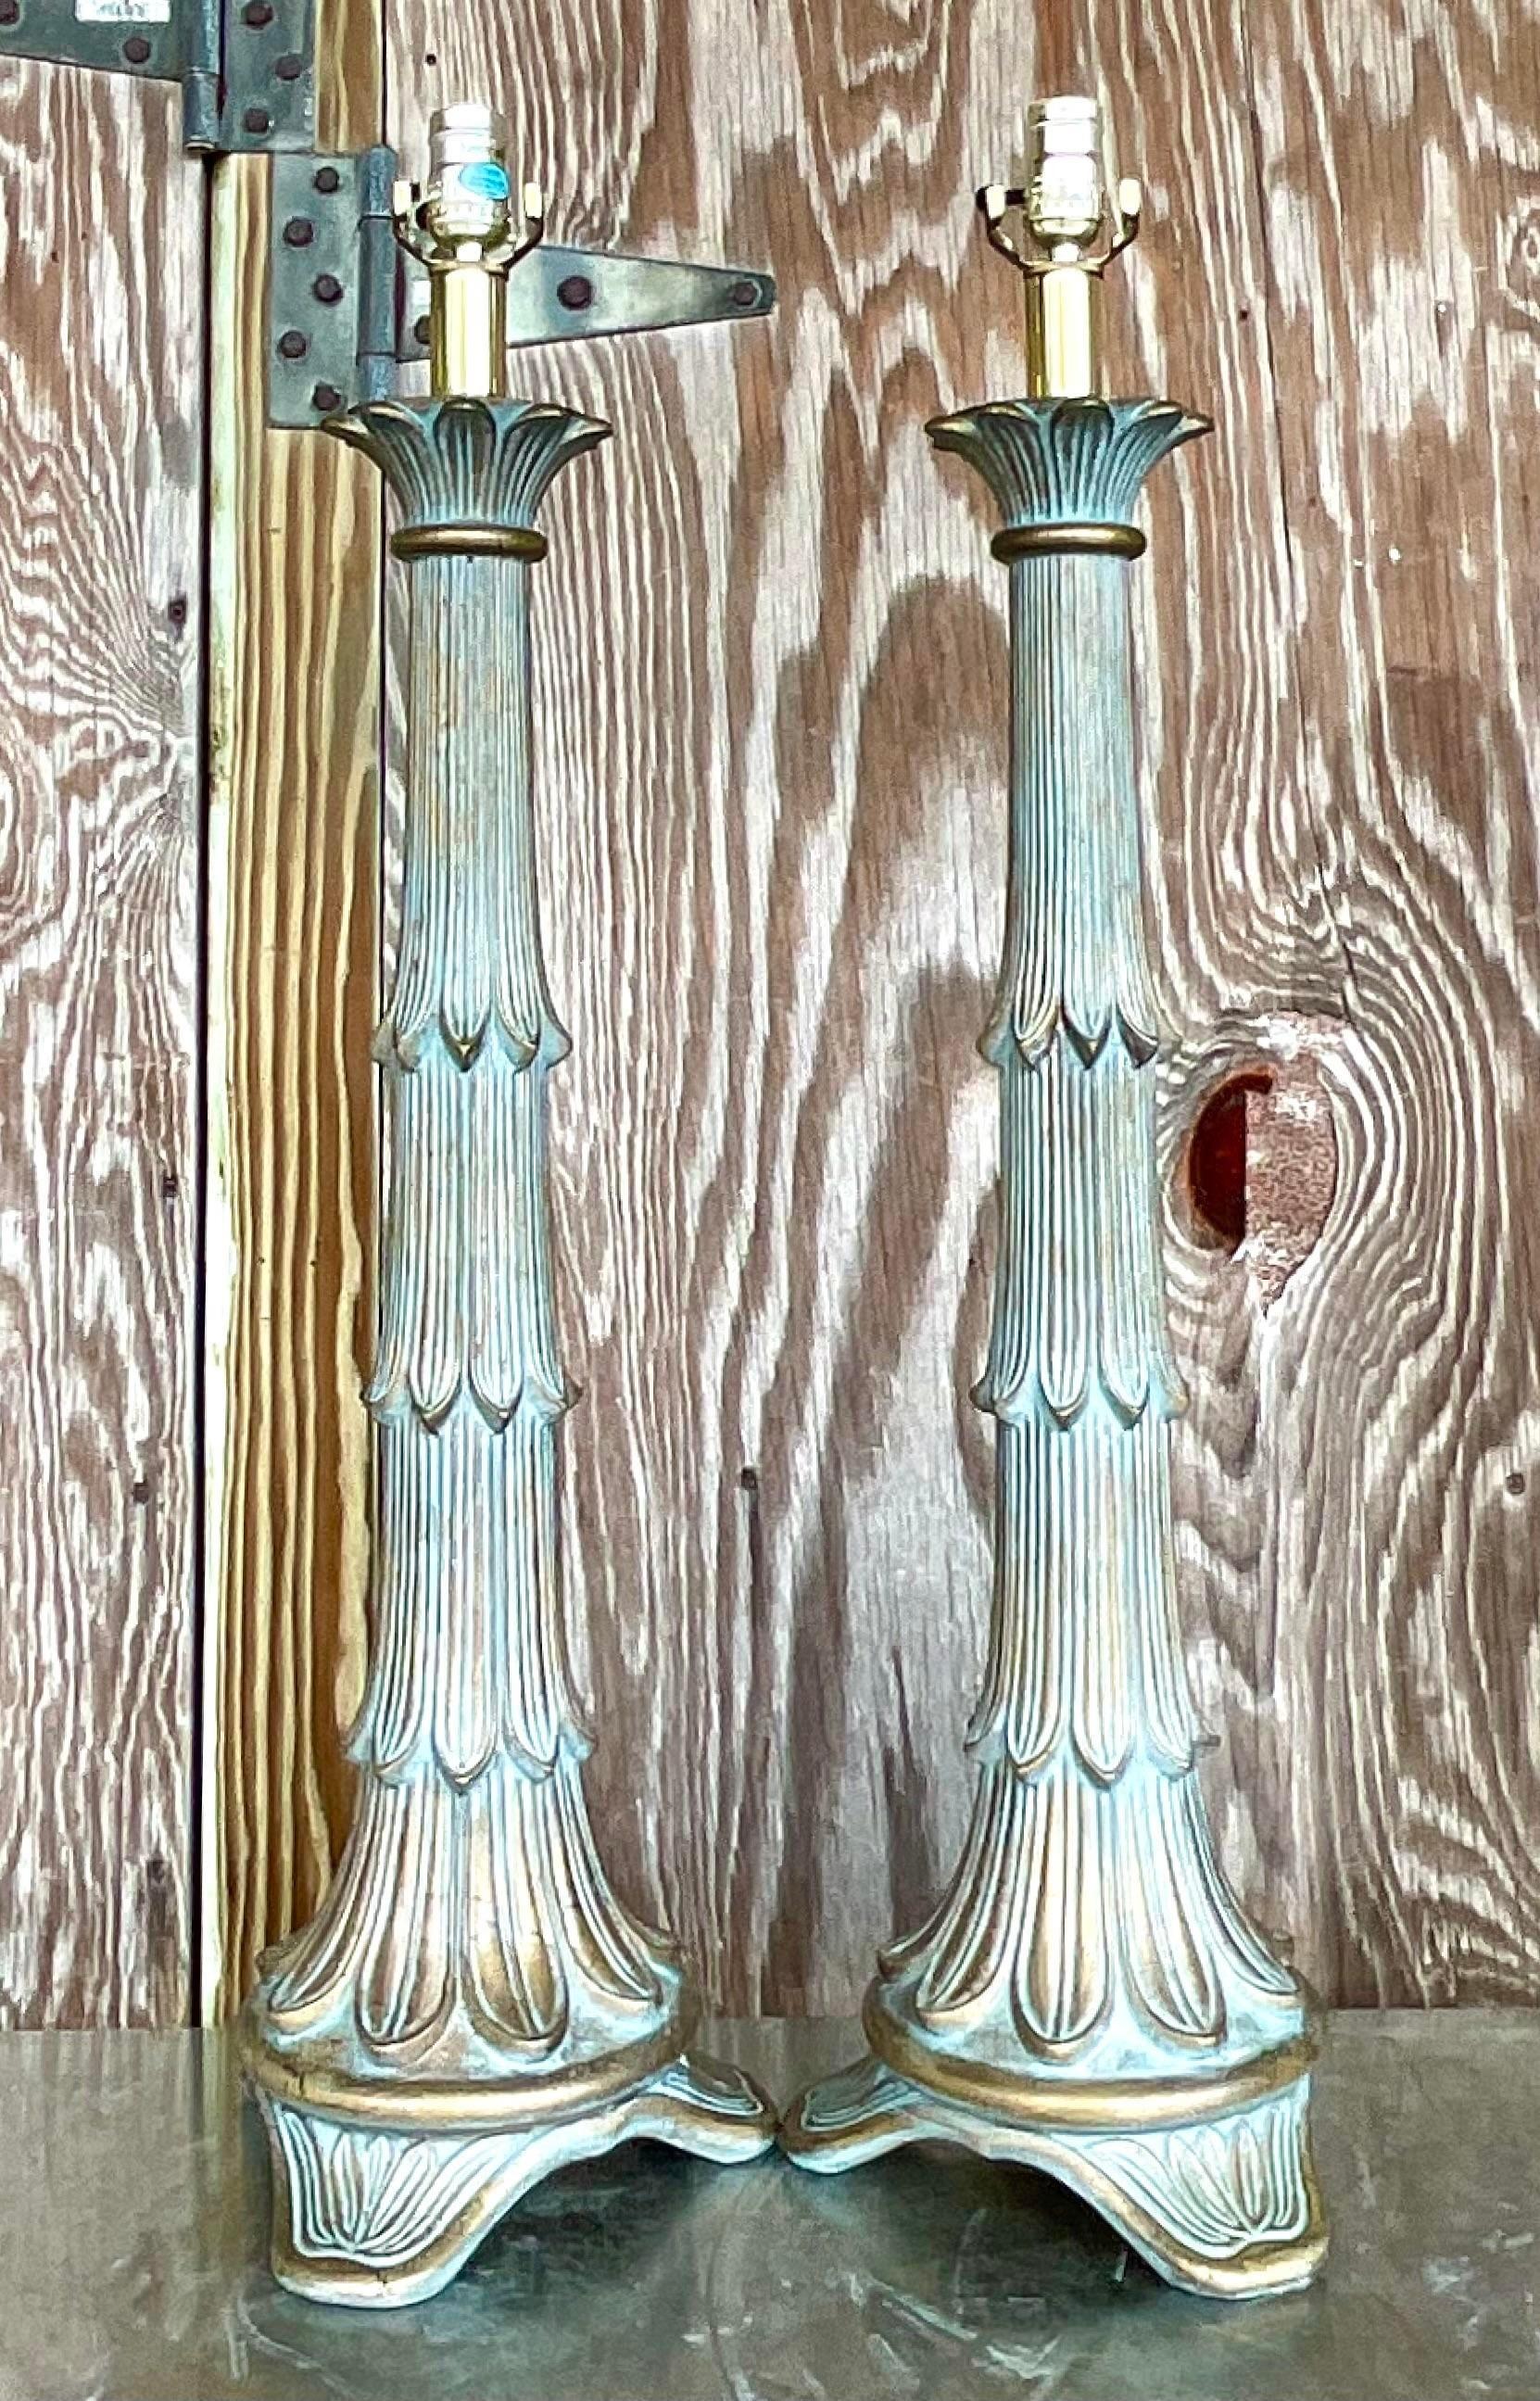 A fabulous pair of vintage Regency table lamps. A chic Italian Florentine design with a patinated bronze finish. Monumental in size and drama. Acquired from a Palm Beach estate.